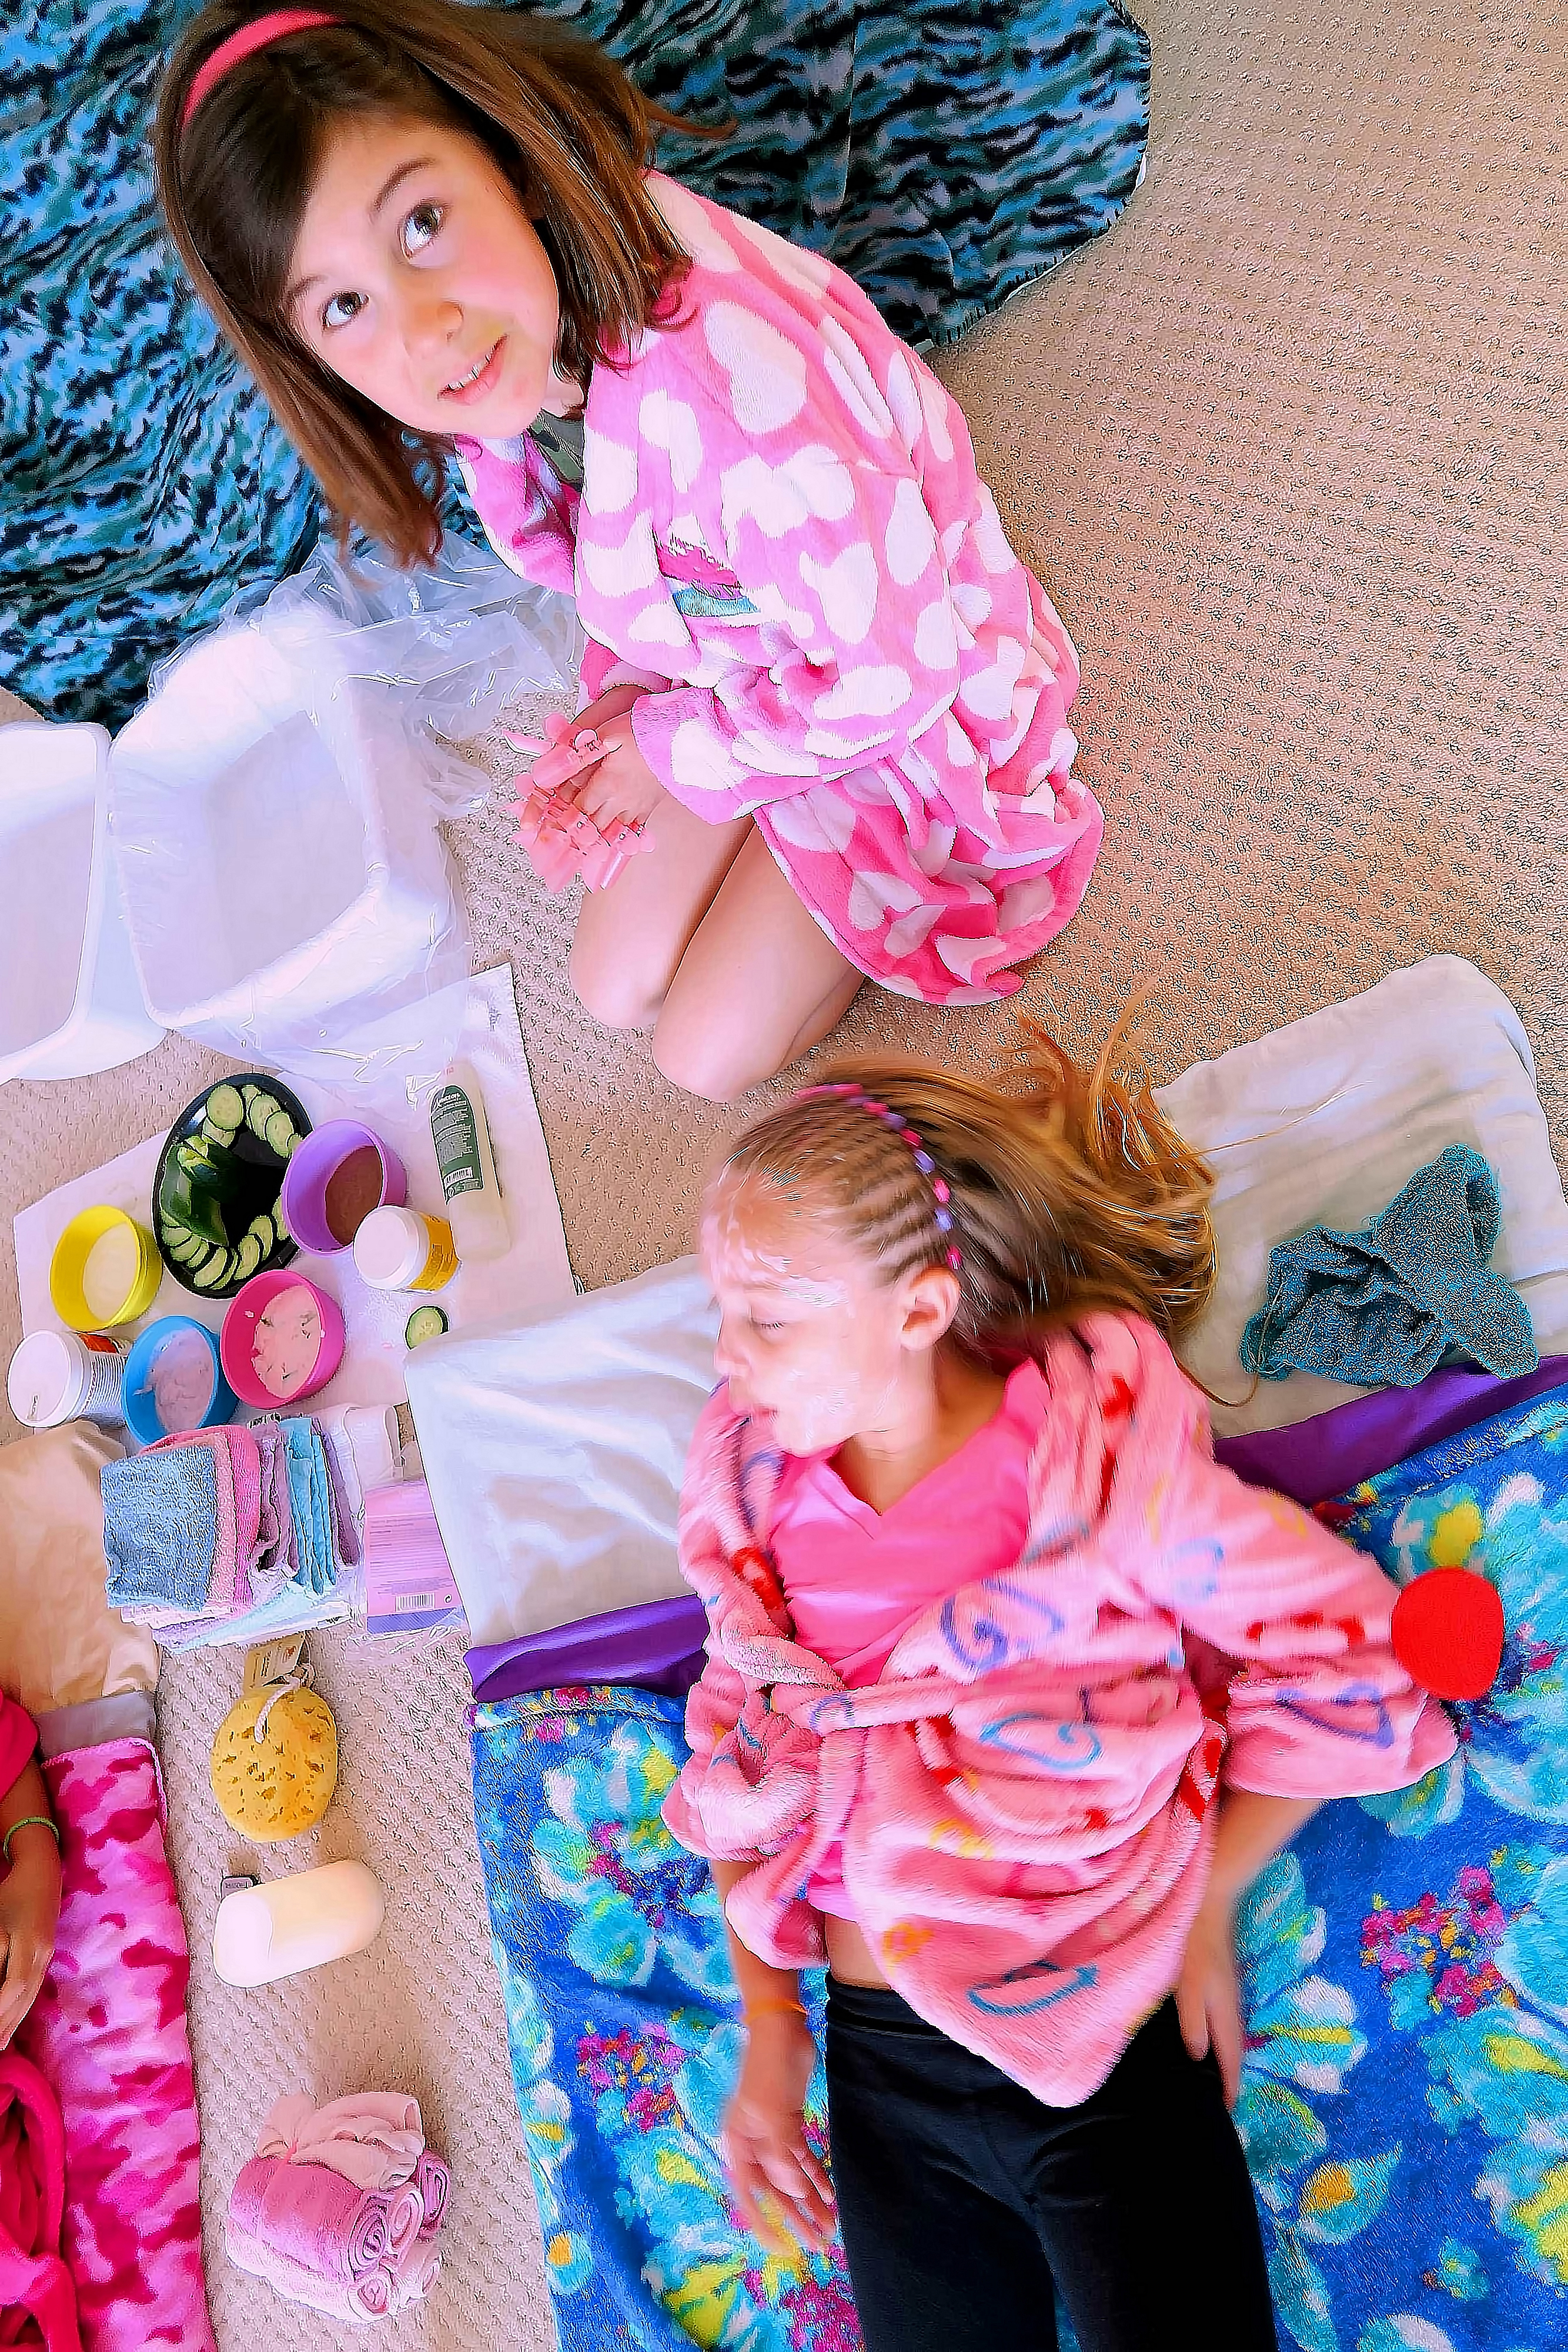 Spa Parties For Girls Give Busy Kids A Moment To Shed Their Worries. 